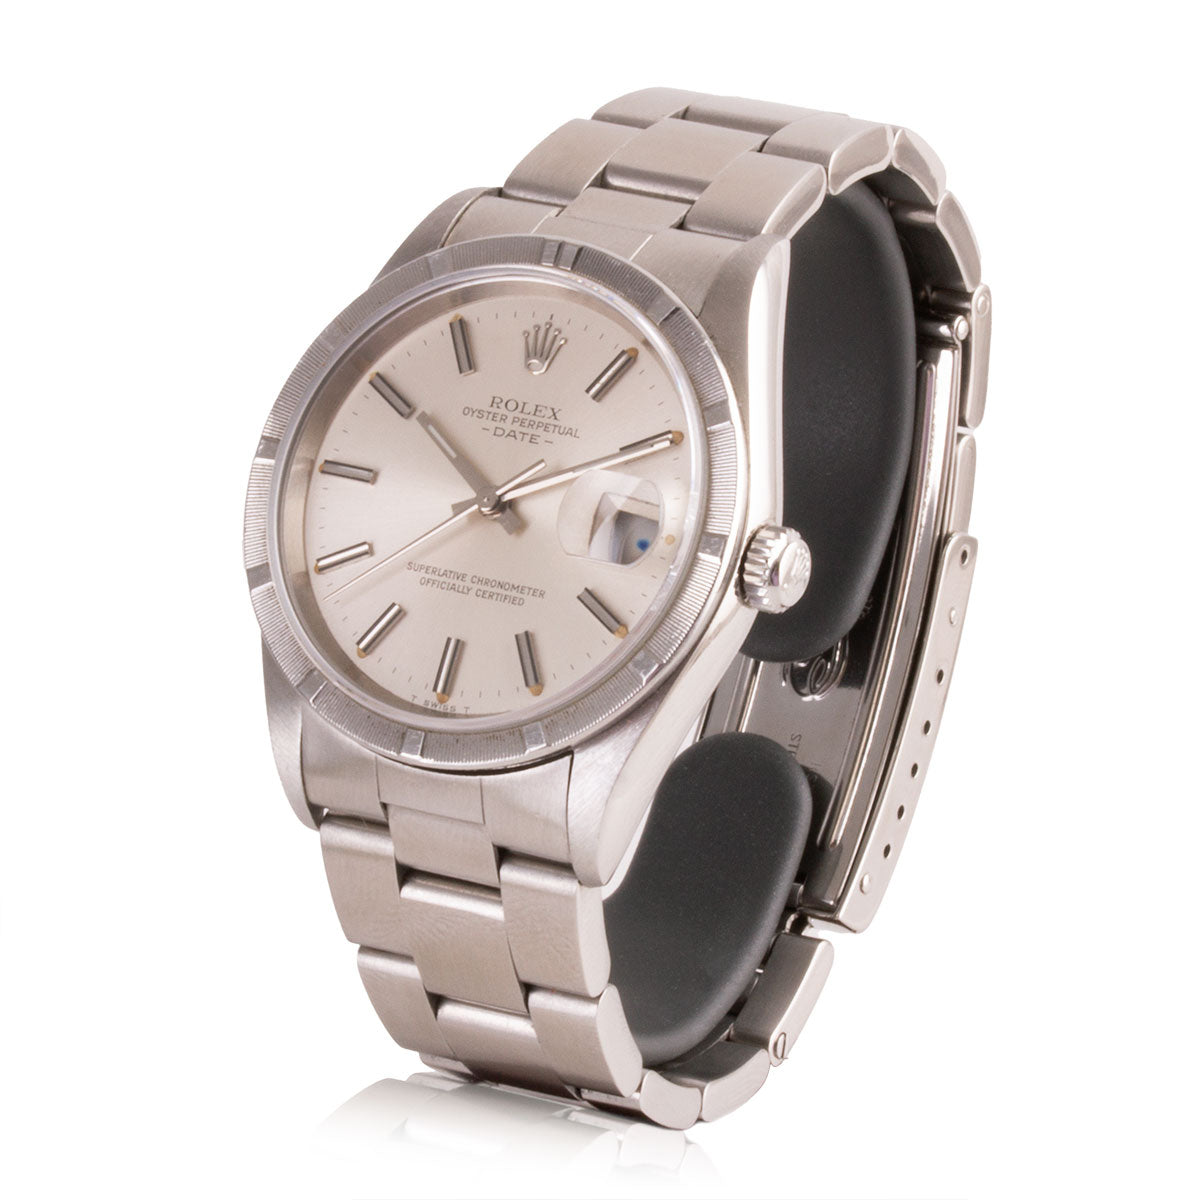 Second-hand watch - Rolex - Oyster Perpetual Date - 4950€